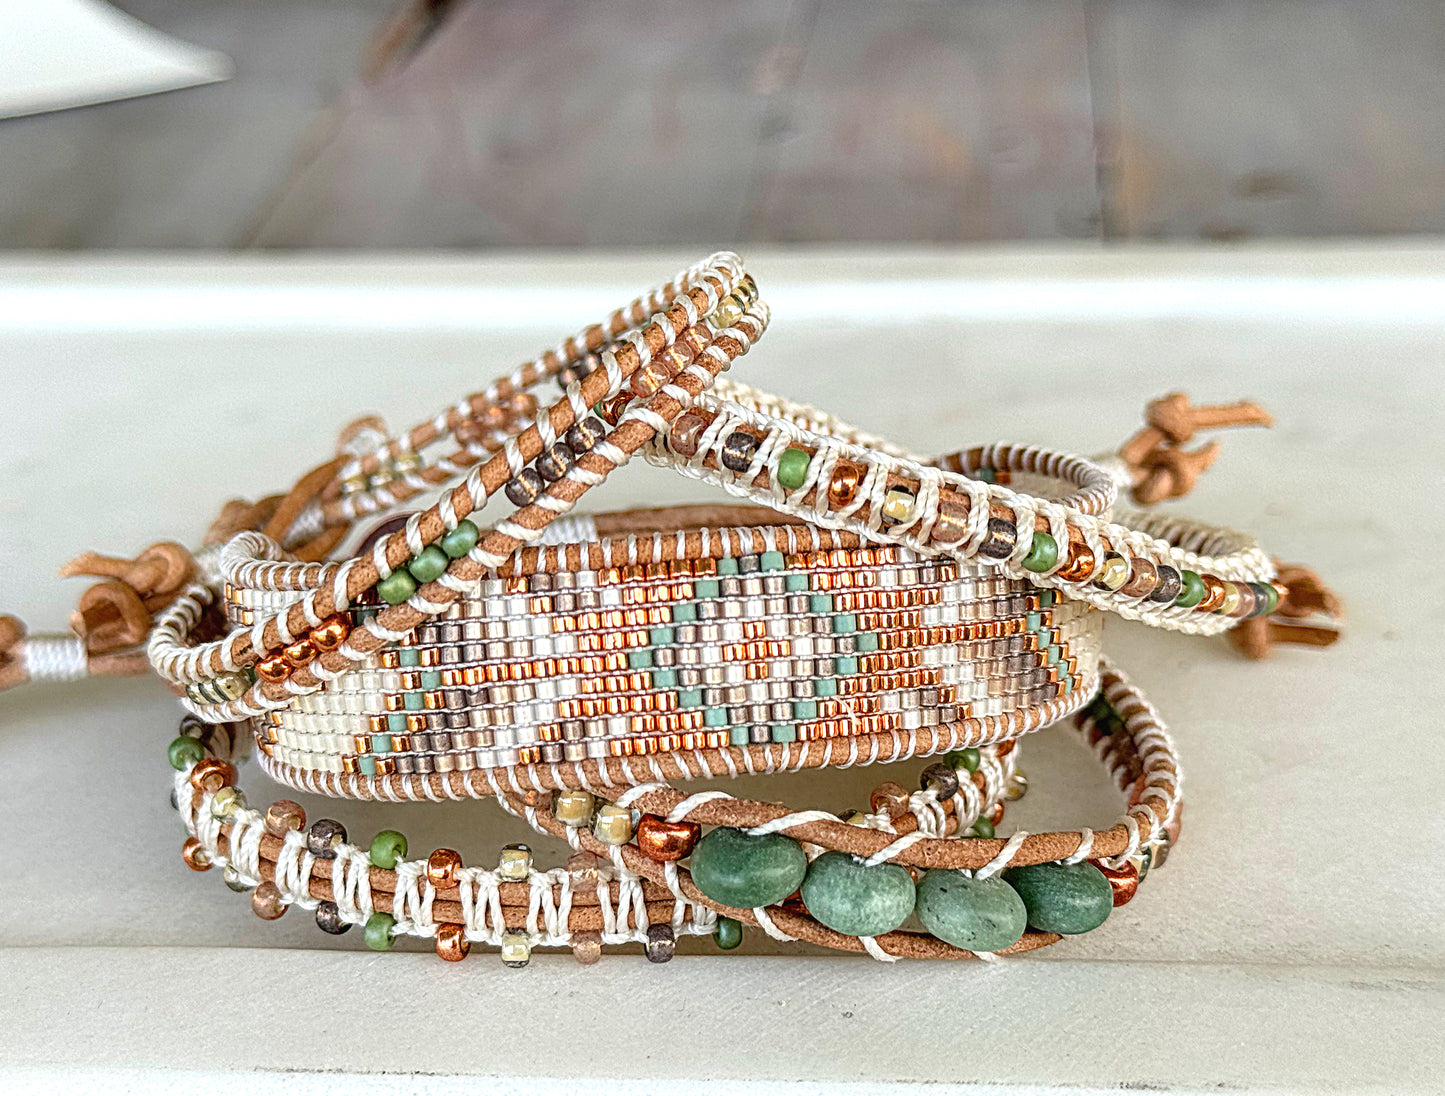 Sage, Neutral, and Copper Small Starburst Bead Loom Woven Bracelet